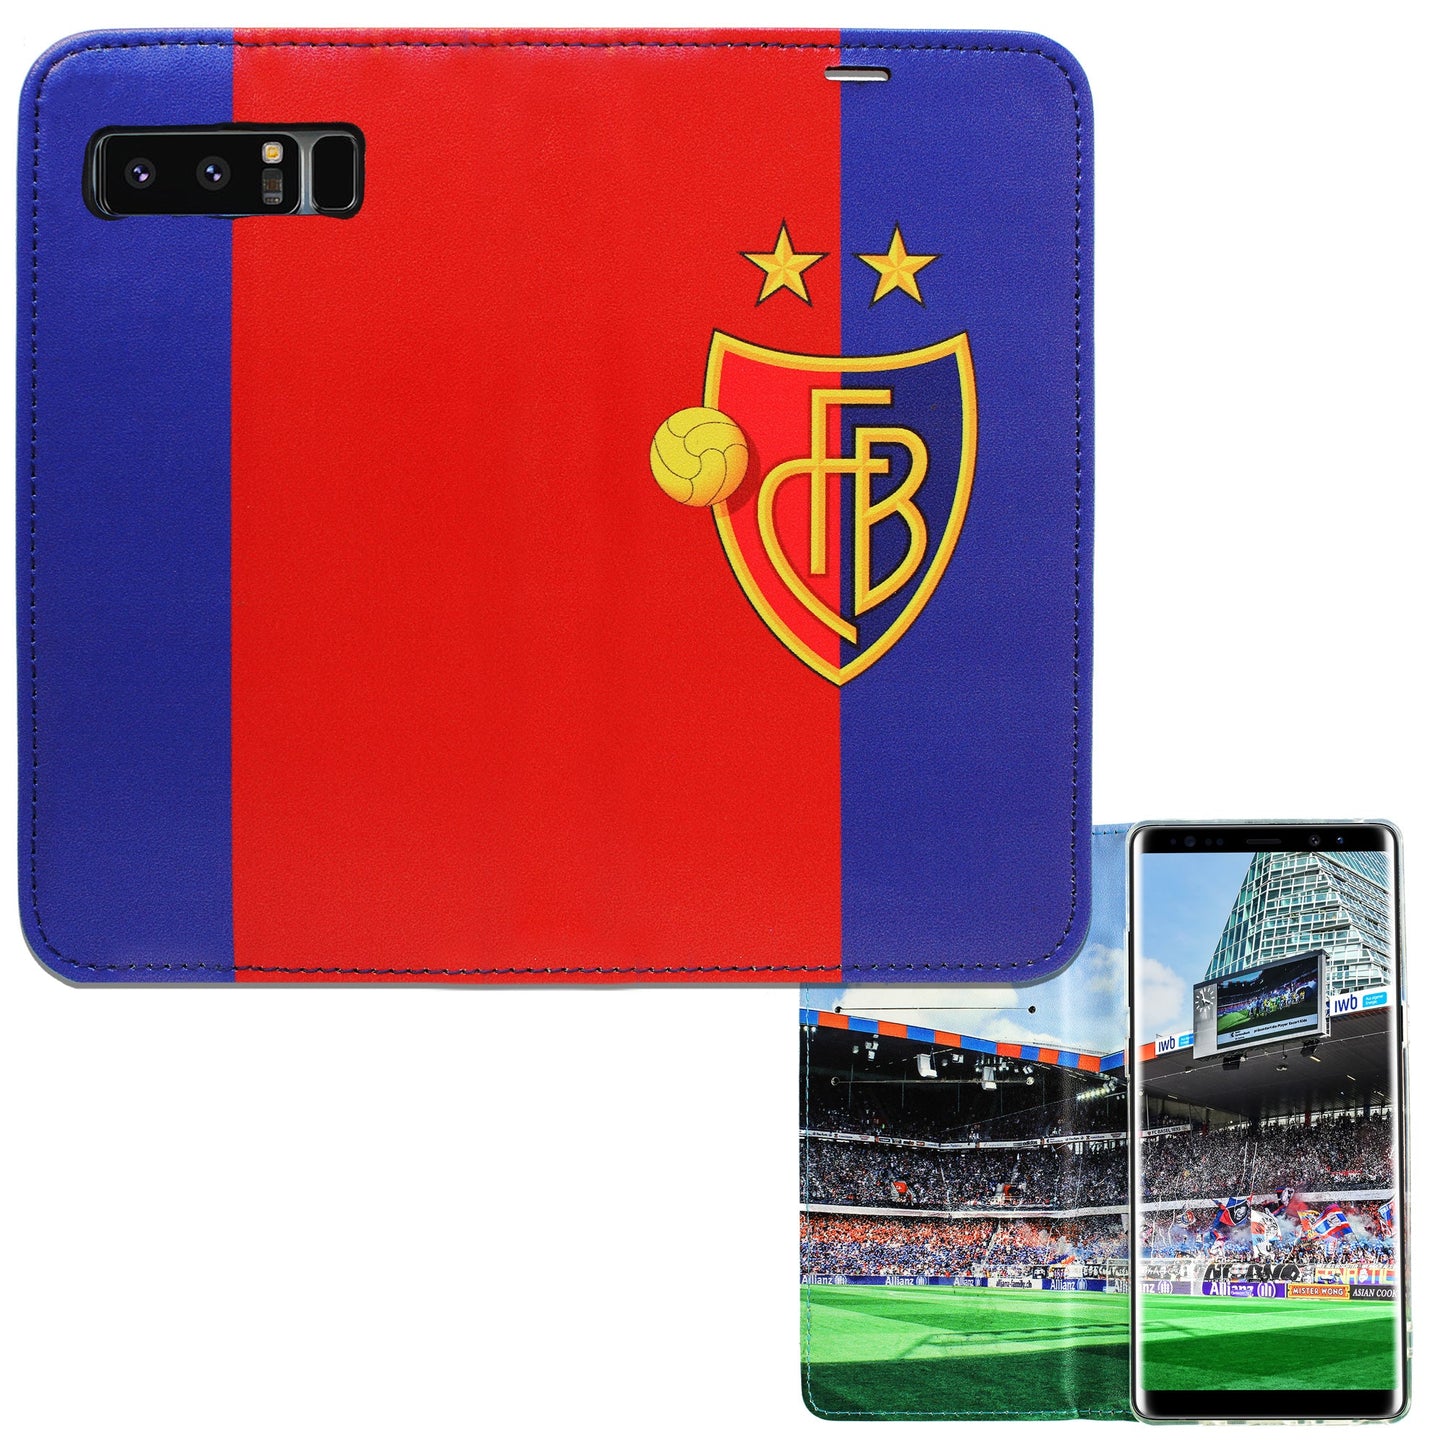 FCB red / blue panoramic case for Samsung Galaxy Note 8